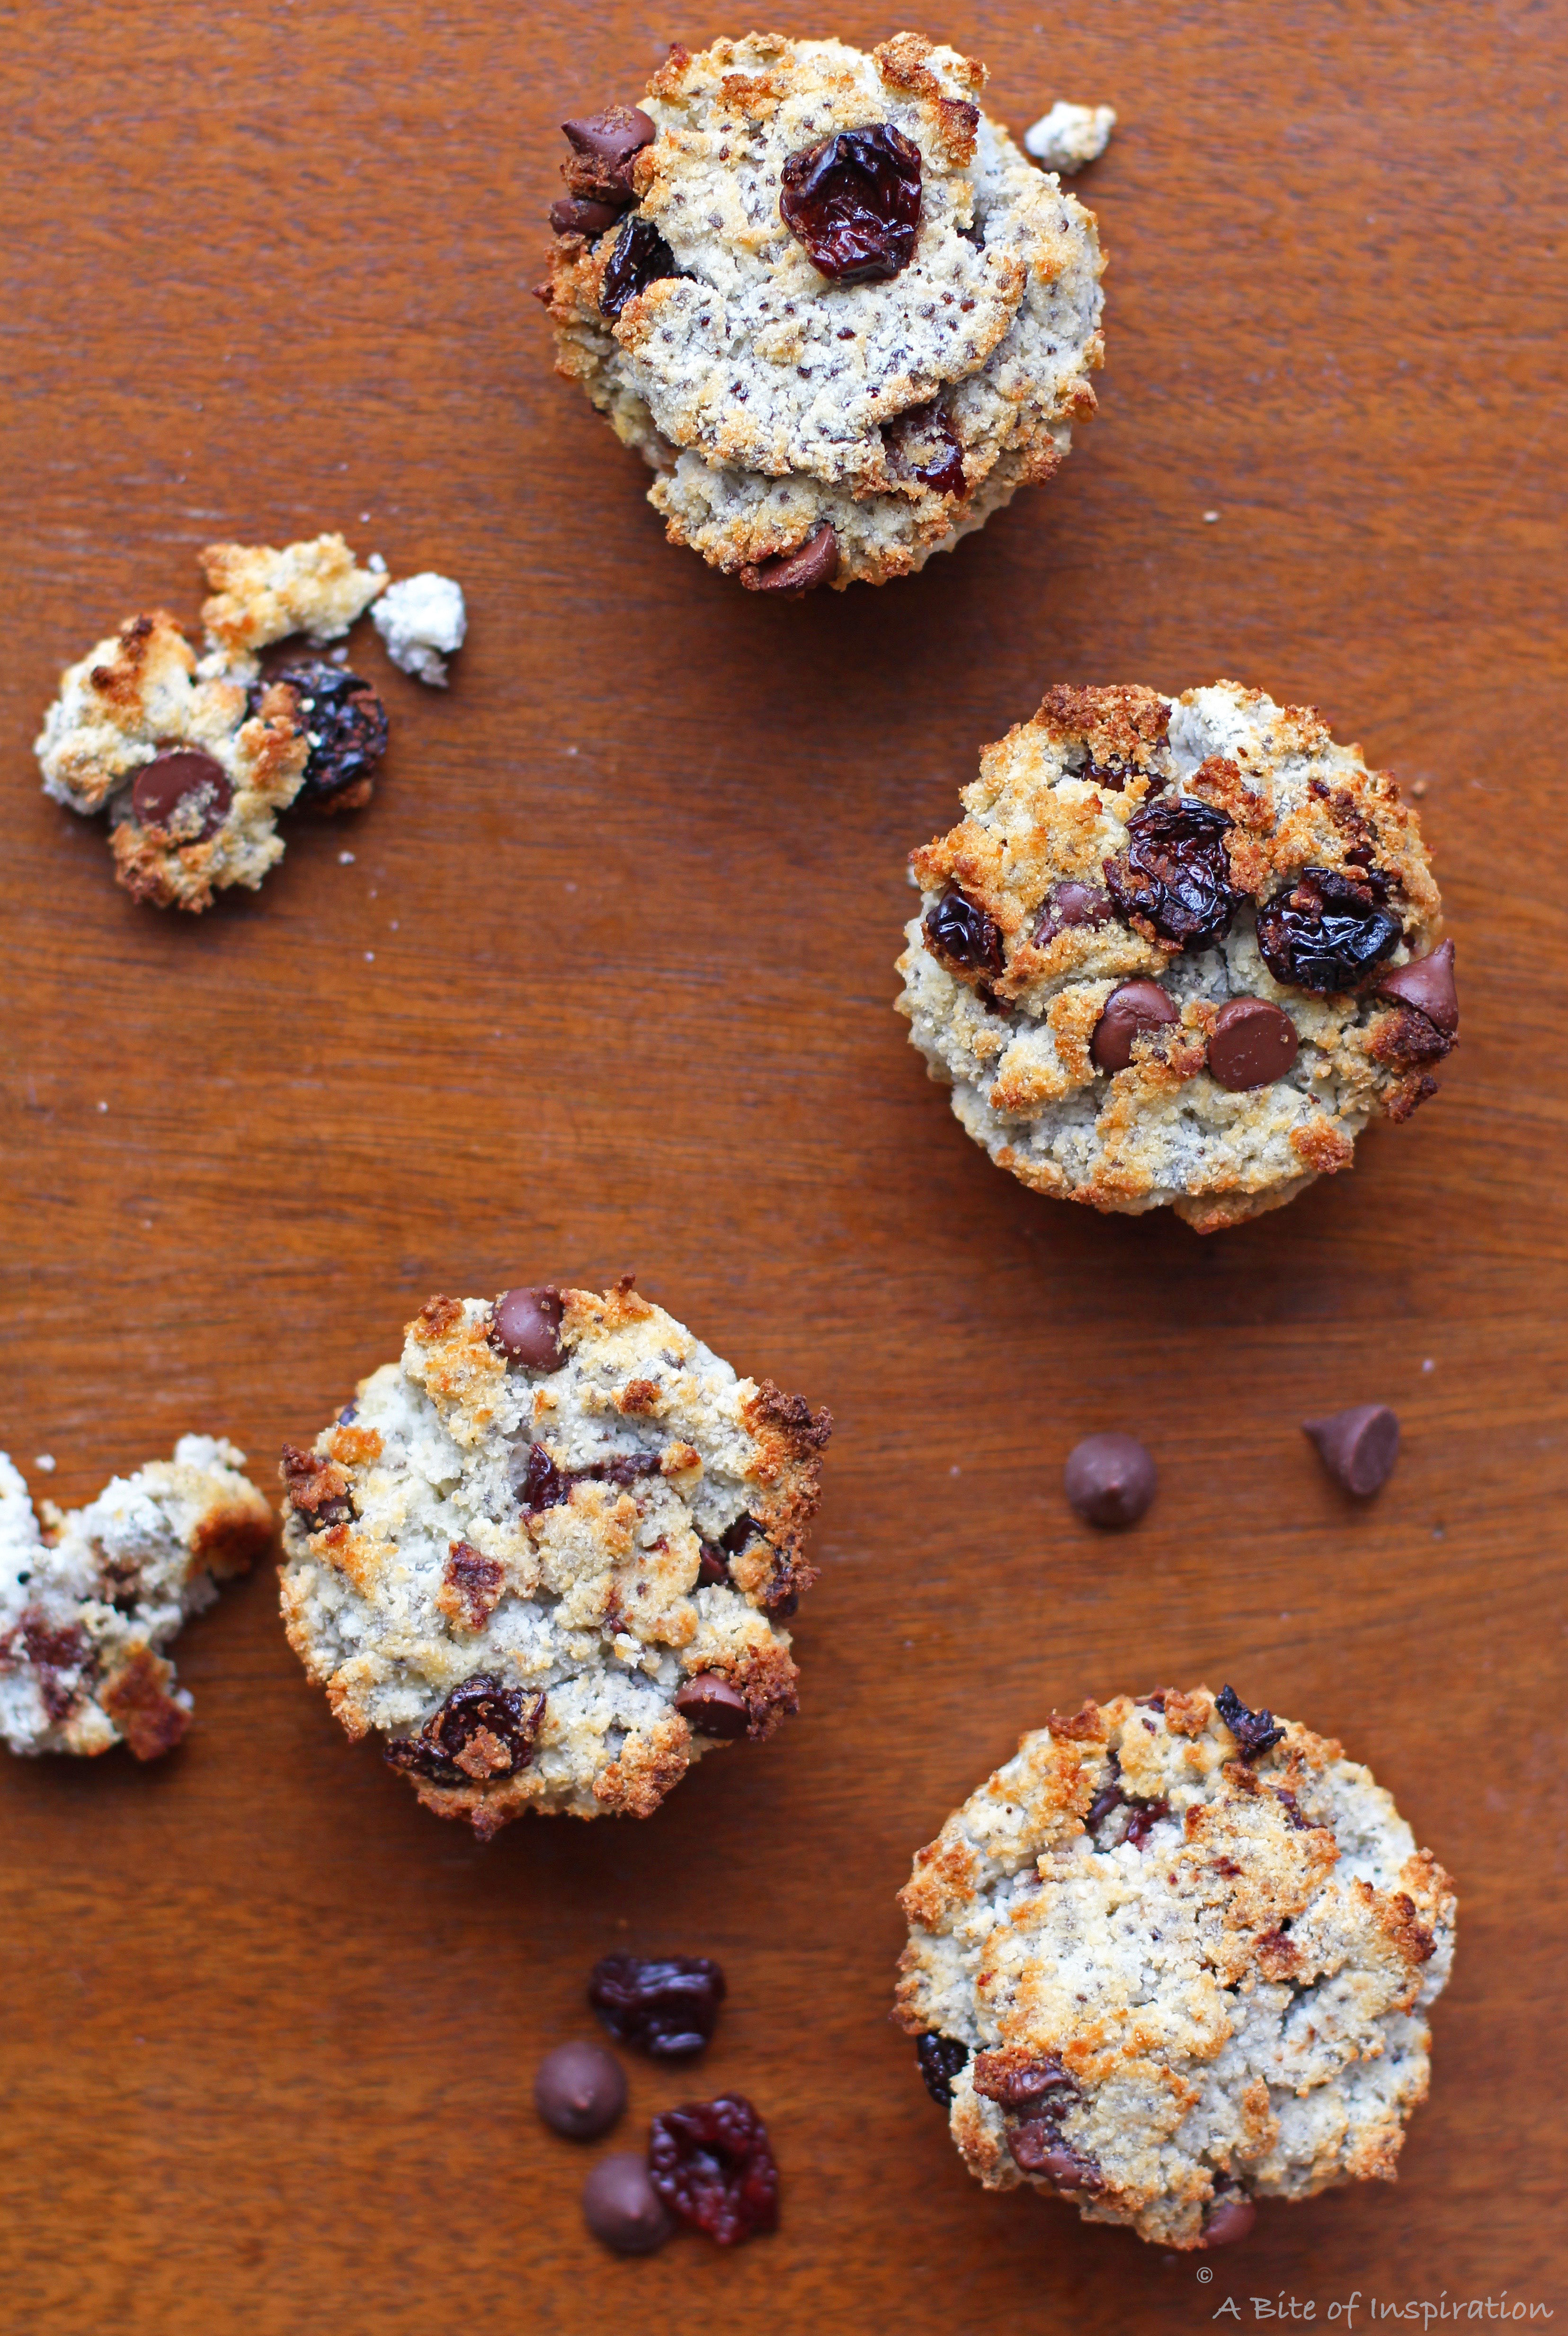 Several muffins scattered on a table surrounded by chocolate chips, cherries, and muffin crumbs